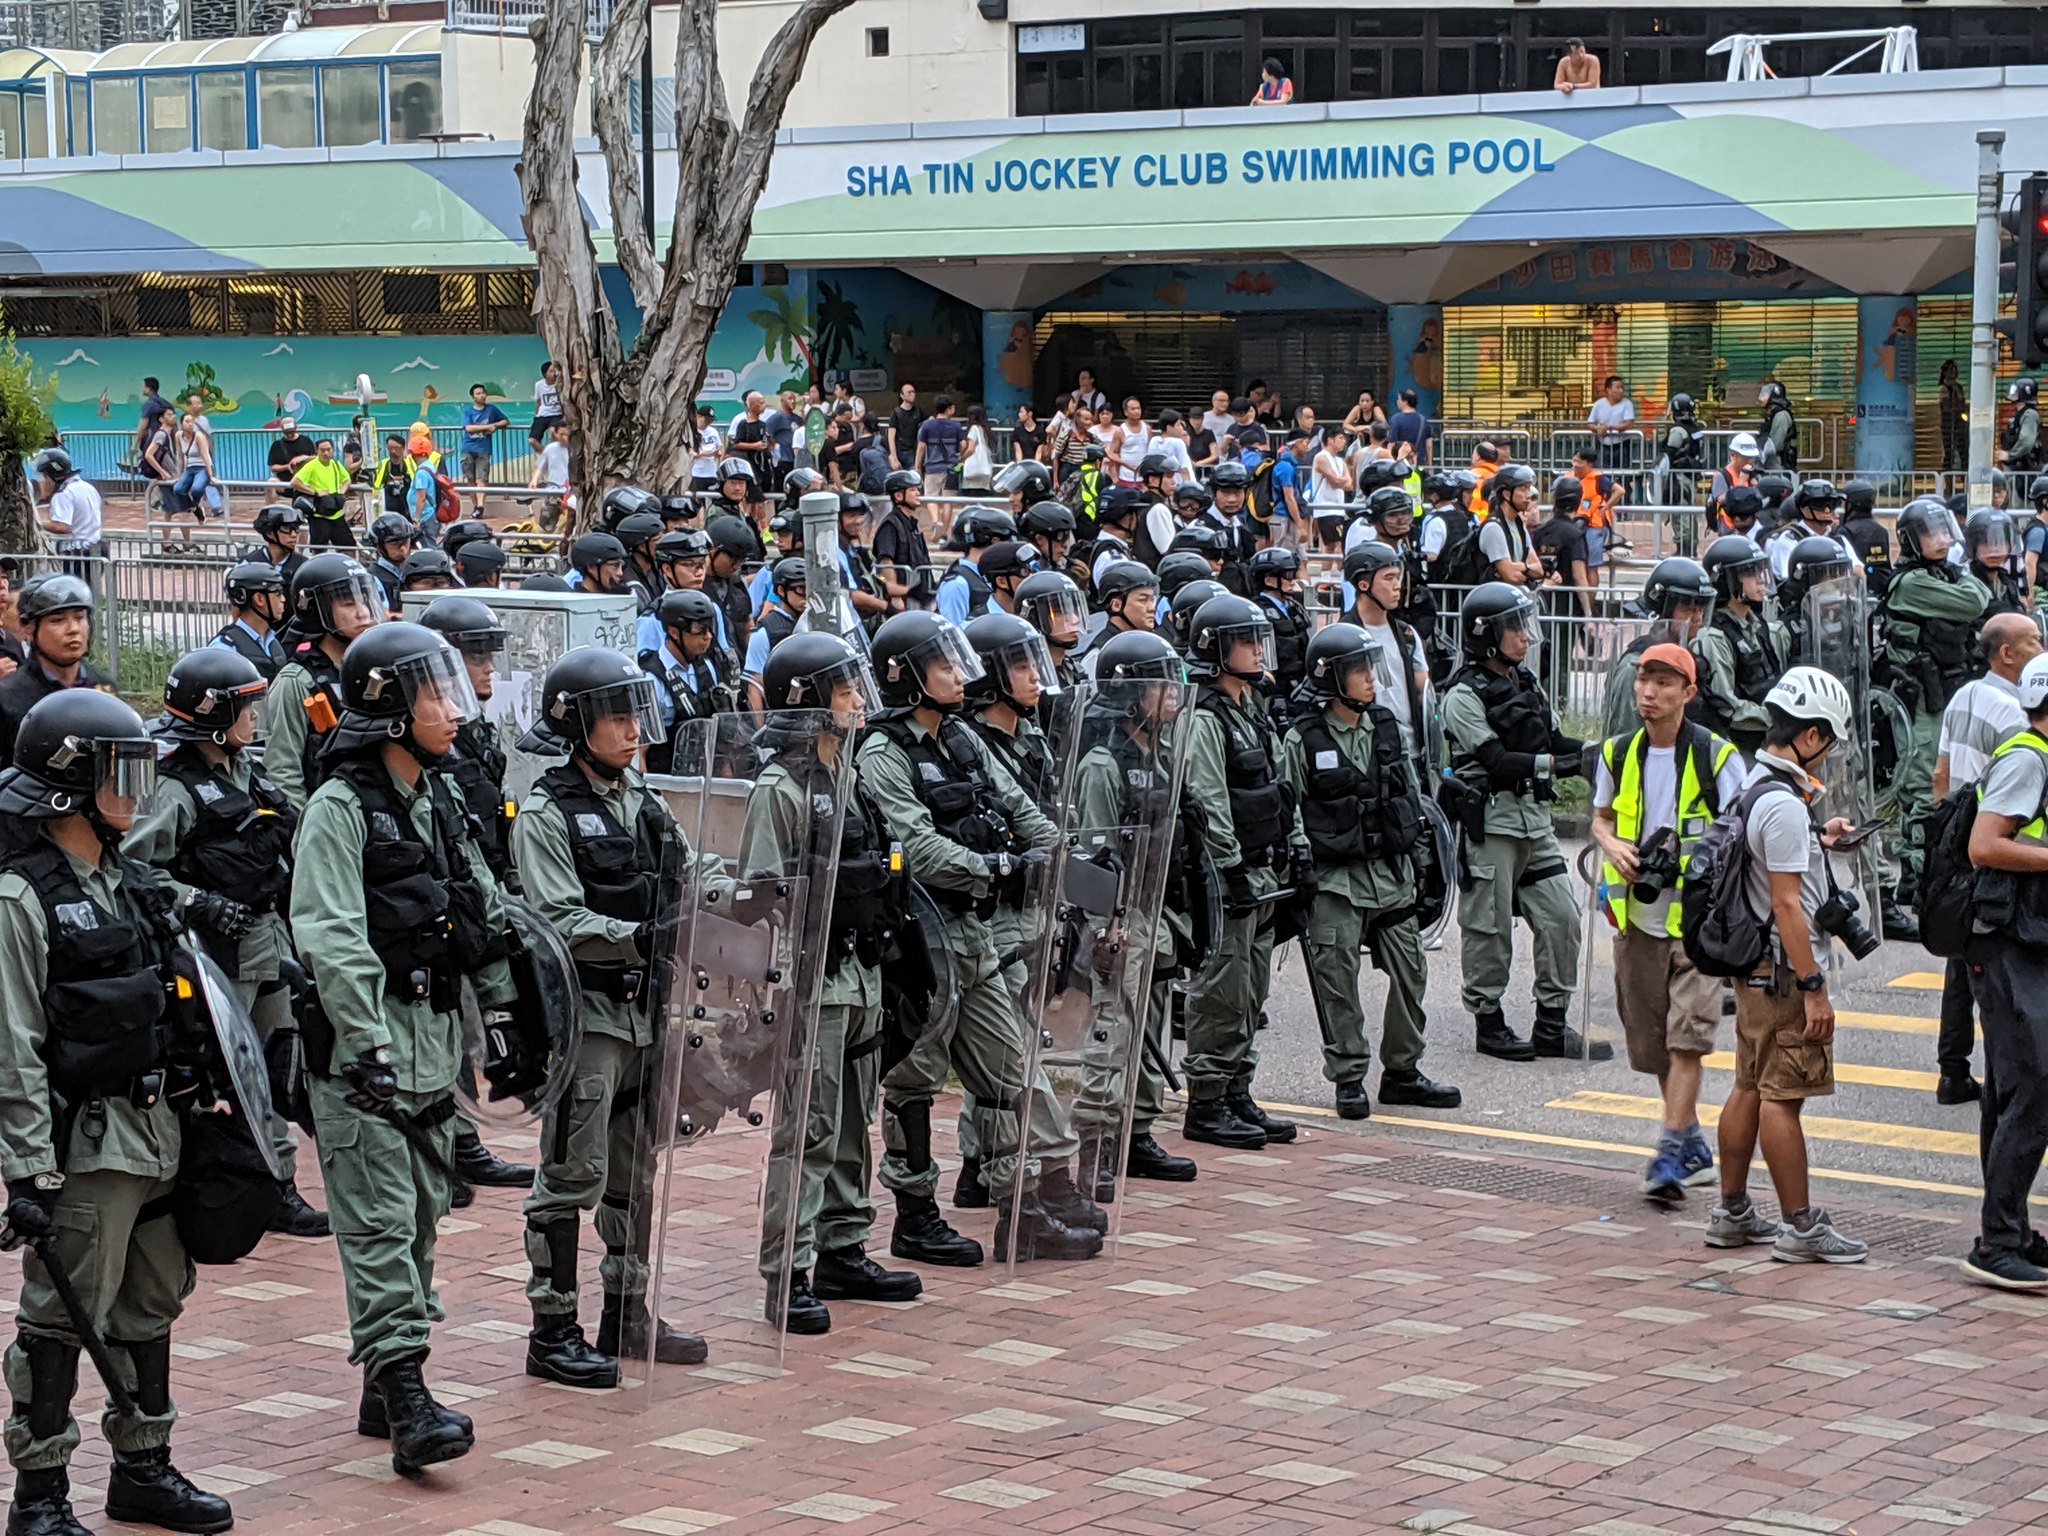 In July 2019, police gathered near an upscale mall in Sha Tin, Hong Kong, to control protesters.